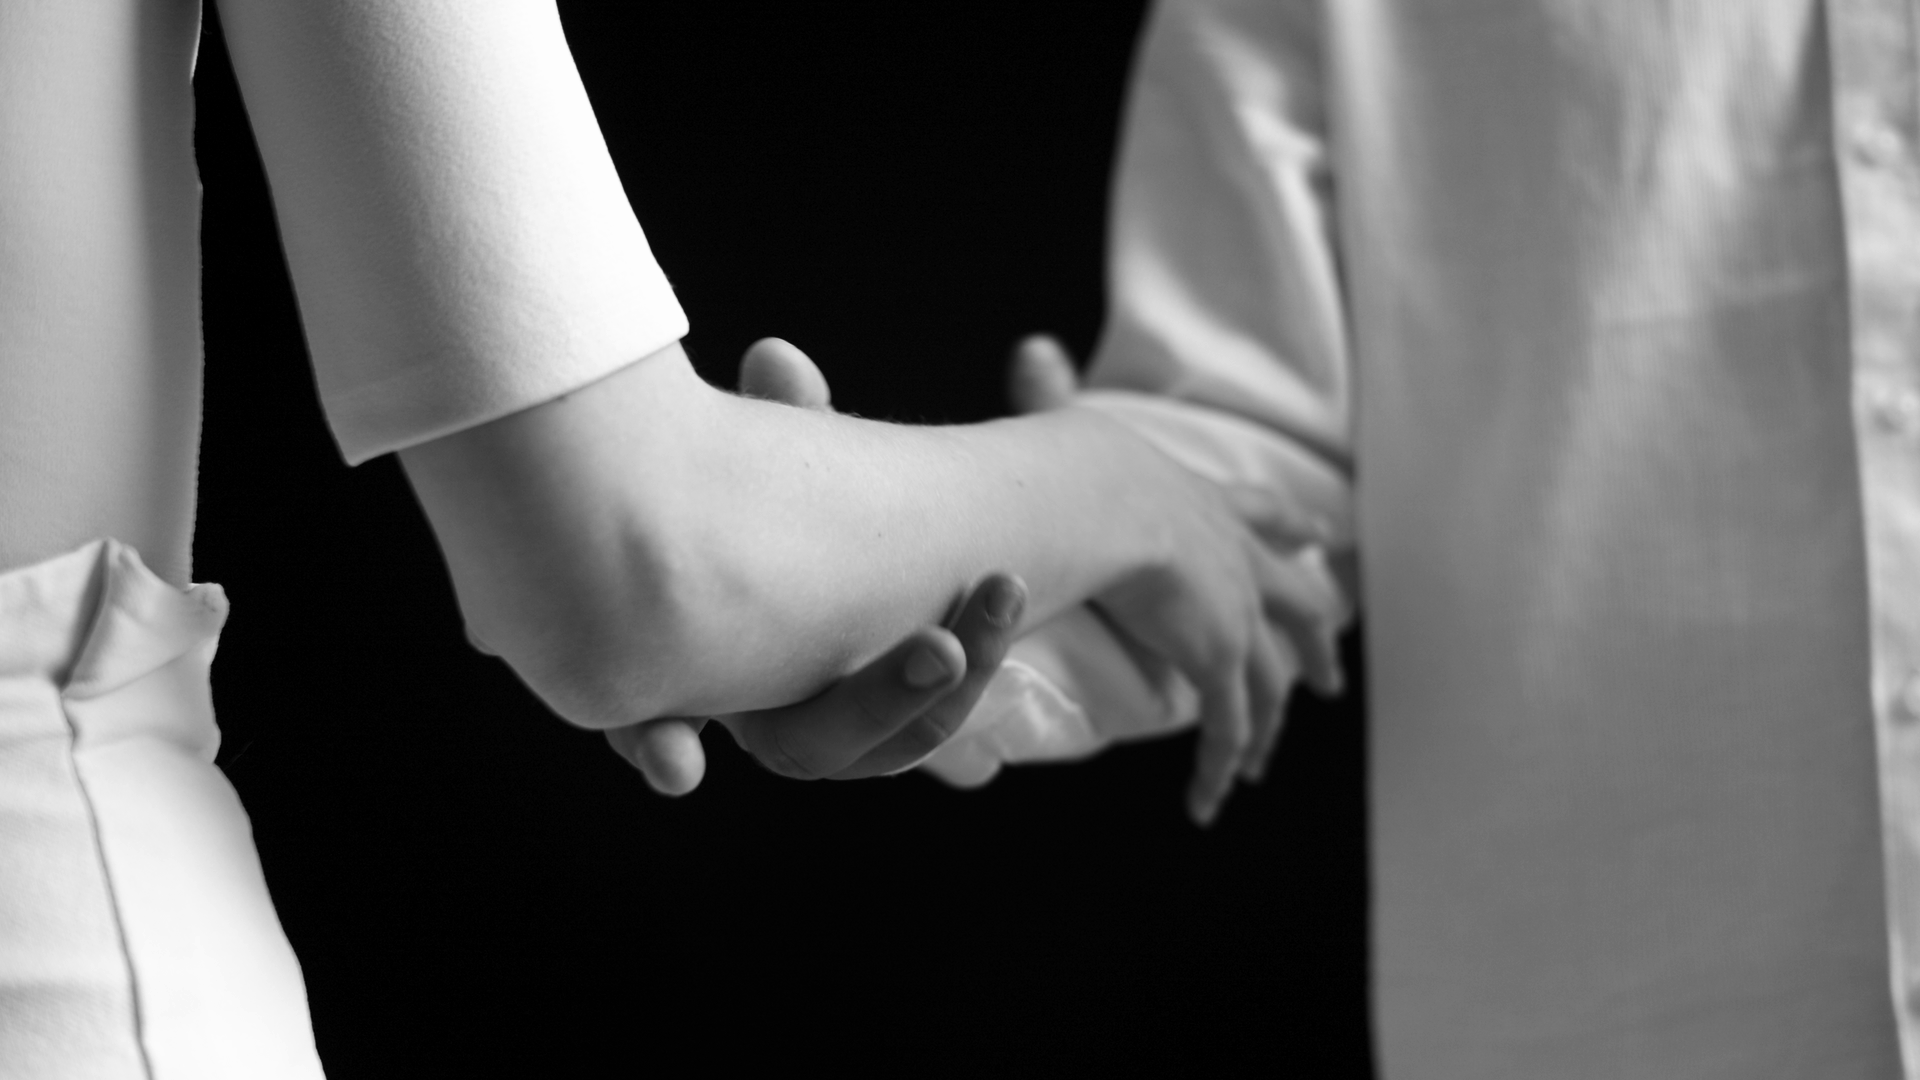 eszter galambos, Black and white image of two hands and arms holding each other. Studio background. 